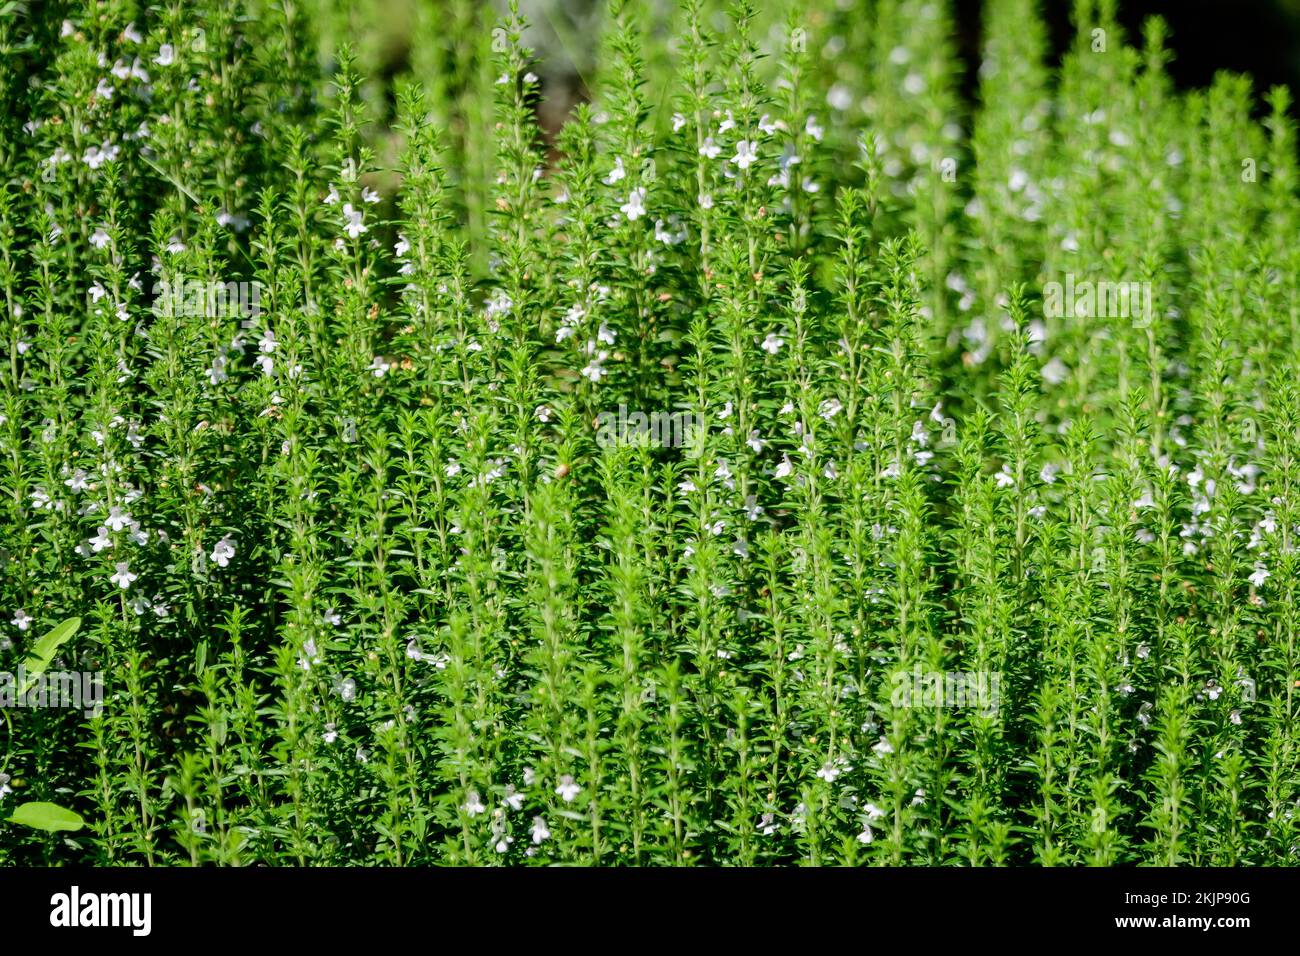 Many small green leaves and white flowers of Hyssopus officinalis plant, known as hyssop, in sunny summer garden, beautiful outdoor monochrome backgro Stock Photo